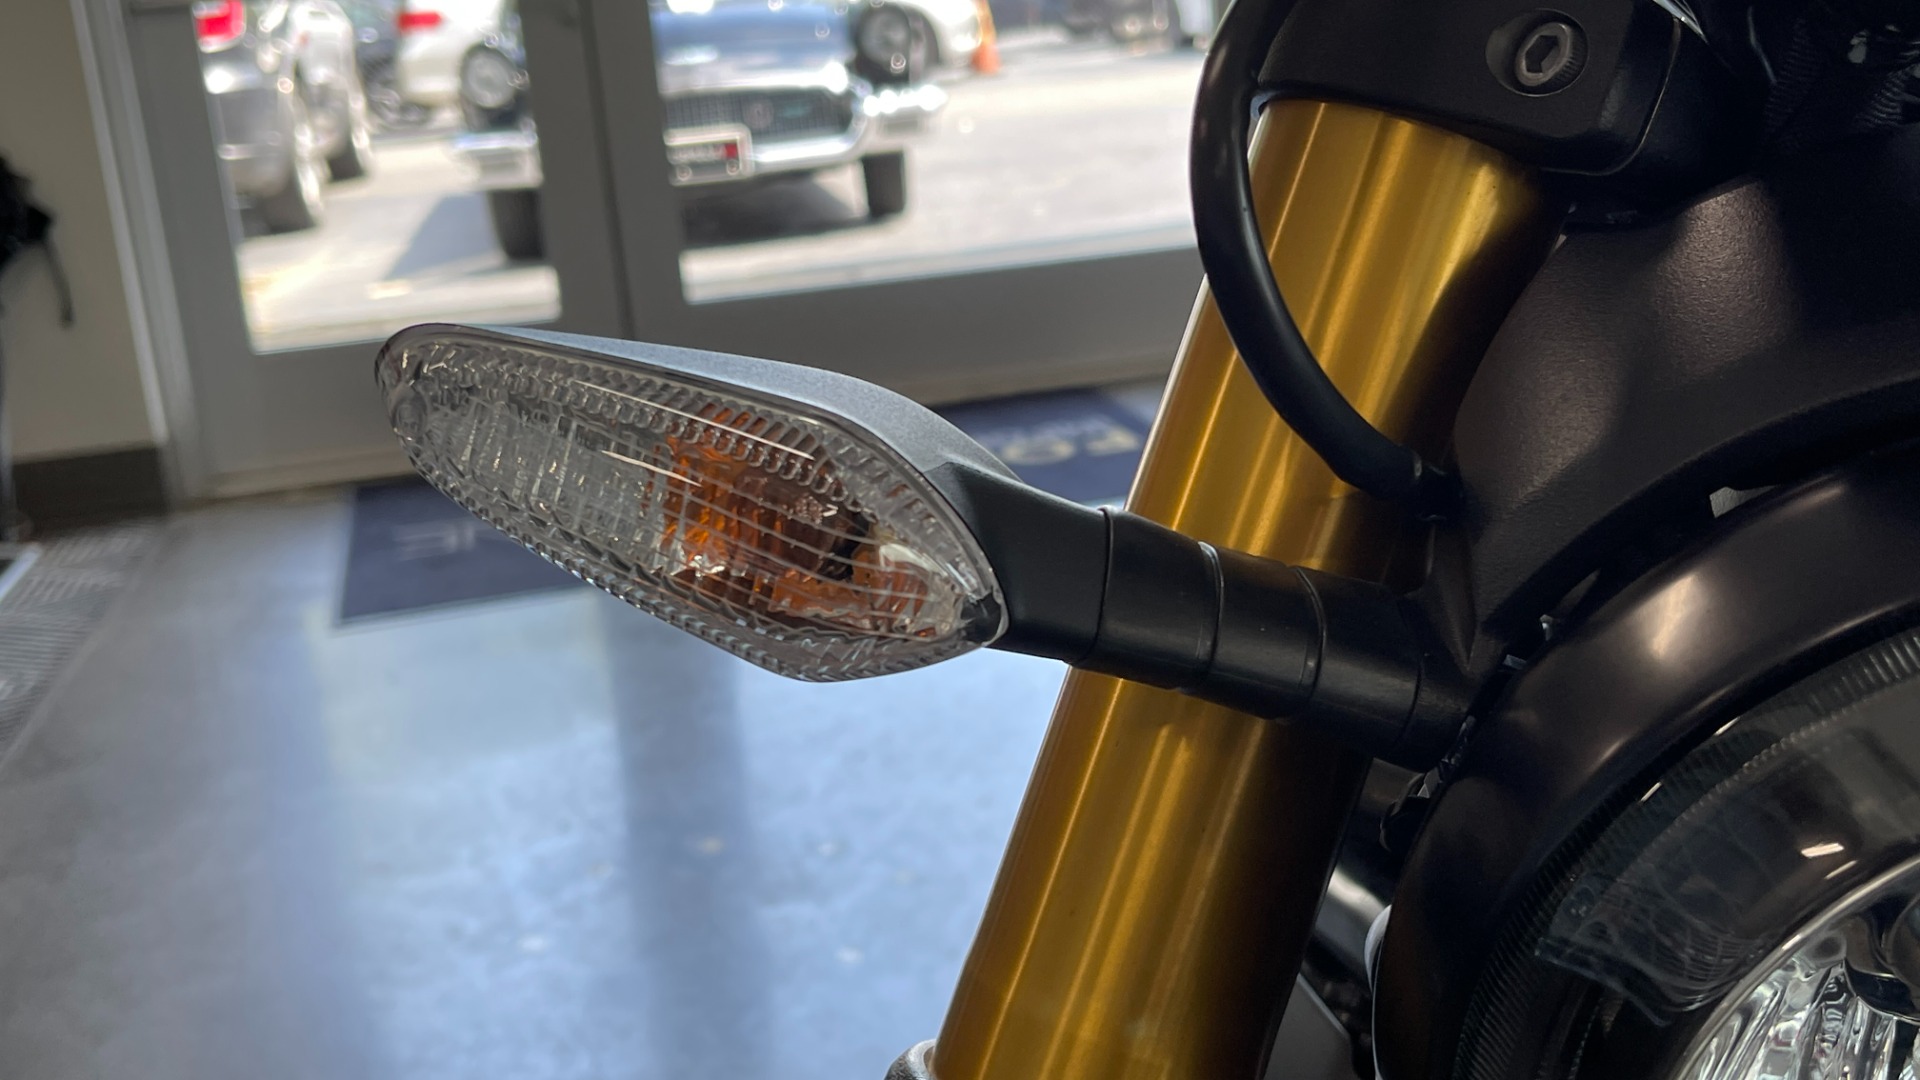 Used 2020 DUCATI SCRAMBLER 1100 SPORT PRO for sale Sold at Formula Imports in Charlotte NC 28227 15